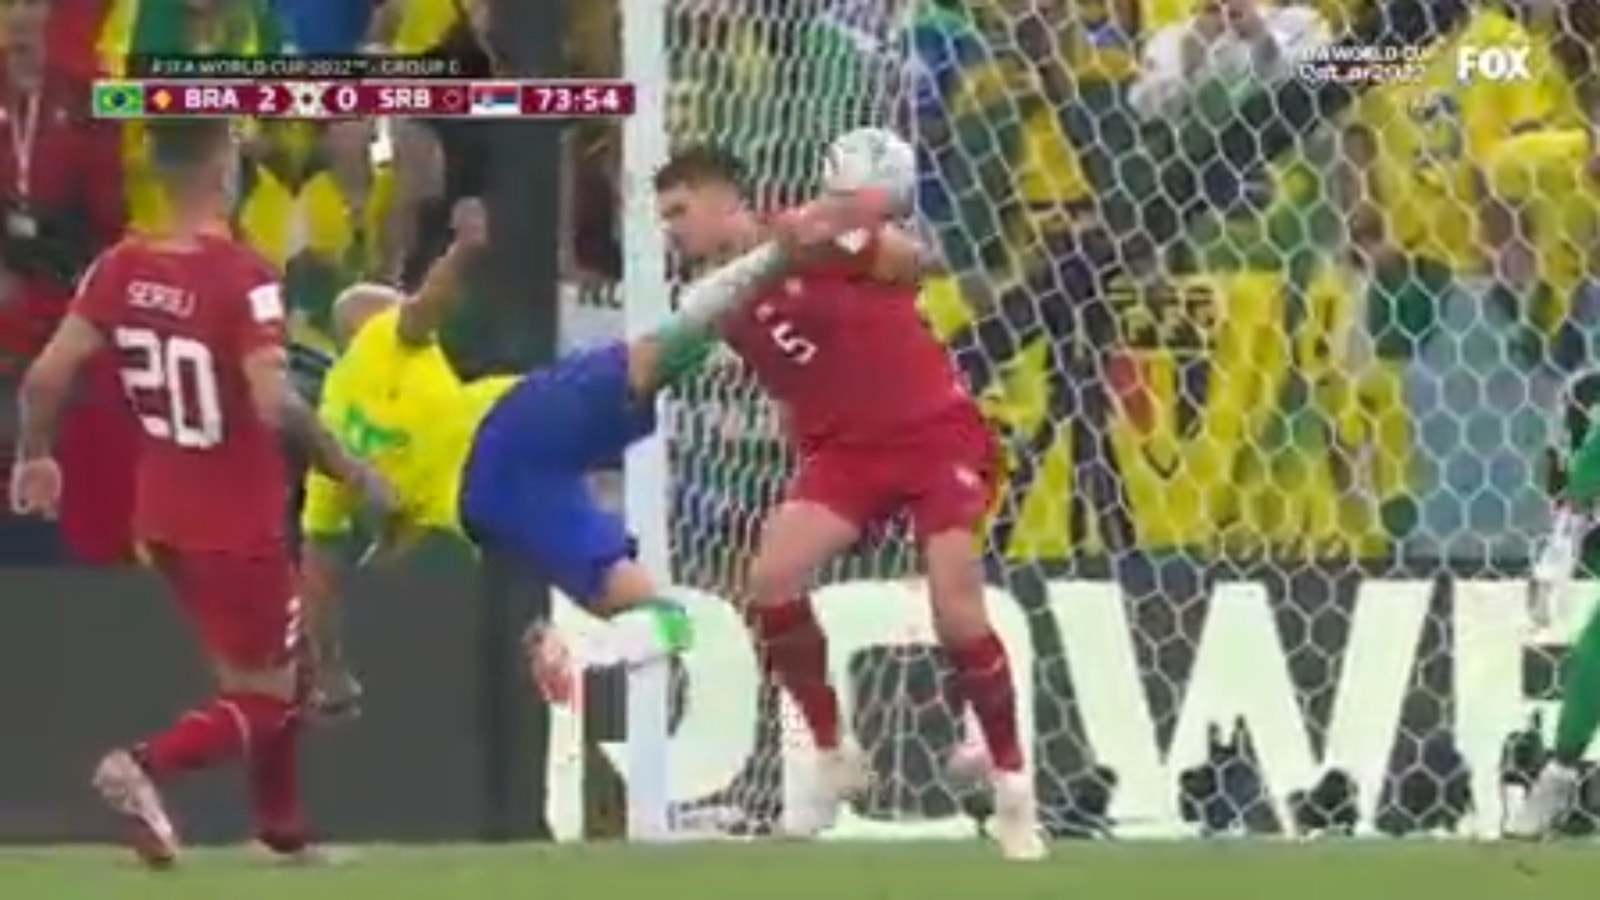 Richarlison gives Brazil the advantage 2-0 with an acrobatic goal at 73'